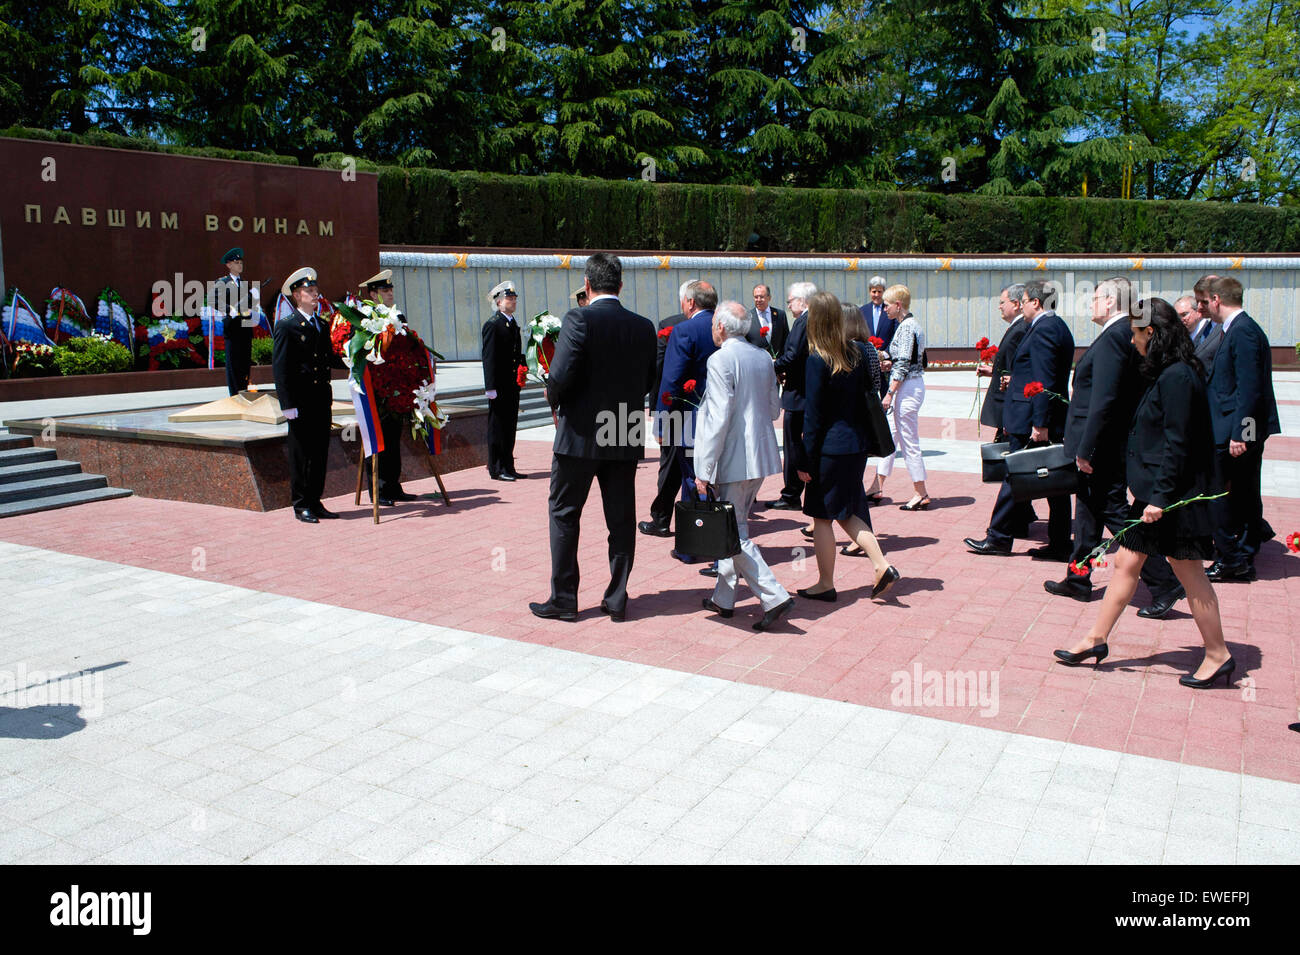 U.S. Secretary of State John Kerry and Russian Foreign Minister Sergey Lavrov watch as members of their respective staffs each place a pair of roses on May 12, 2015, at the Zavokzalny War Memorial in Sochi, Russia, built in 1985 to commemorate the 40th anniversary of the end of World War II, and where about 4,000 soldiers are buried. Stock Photo